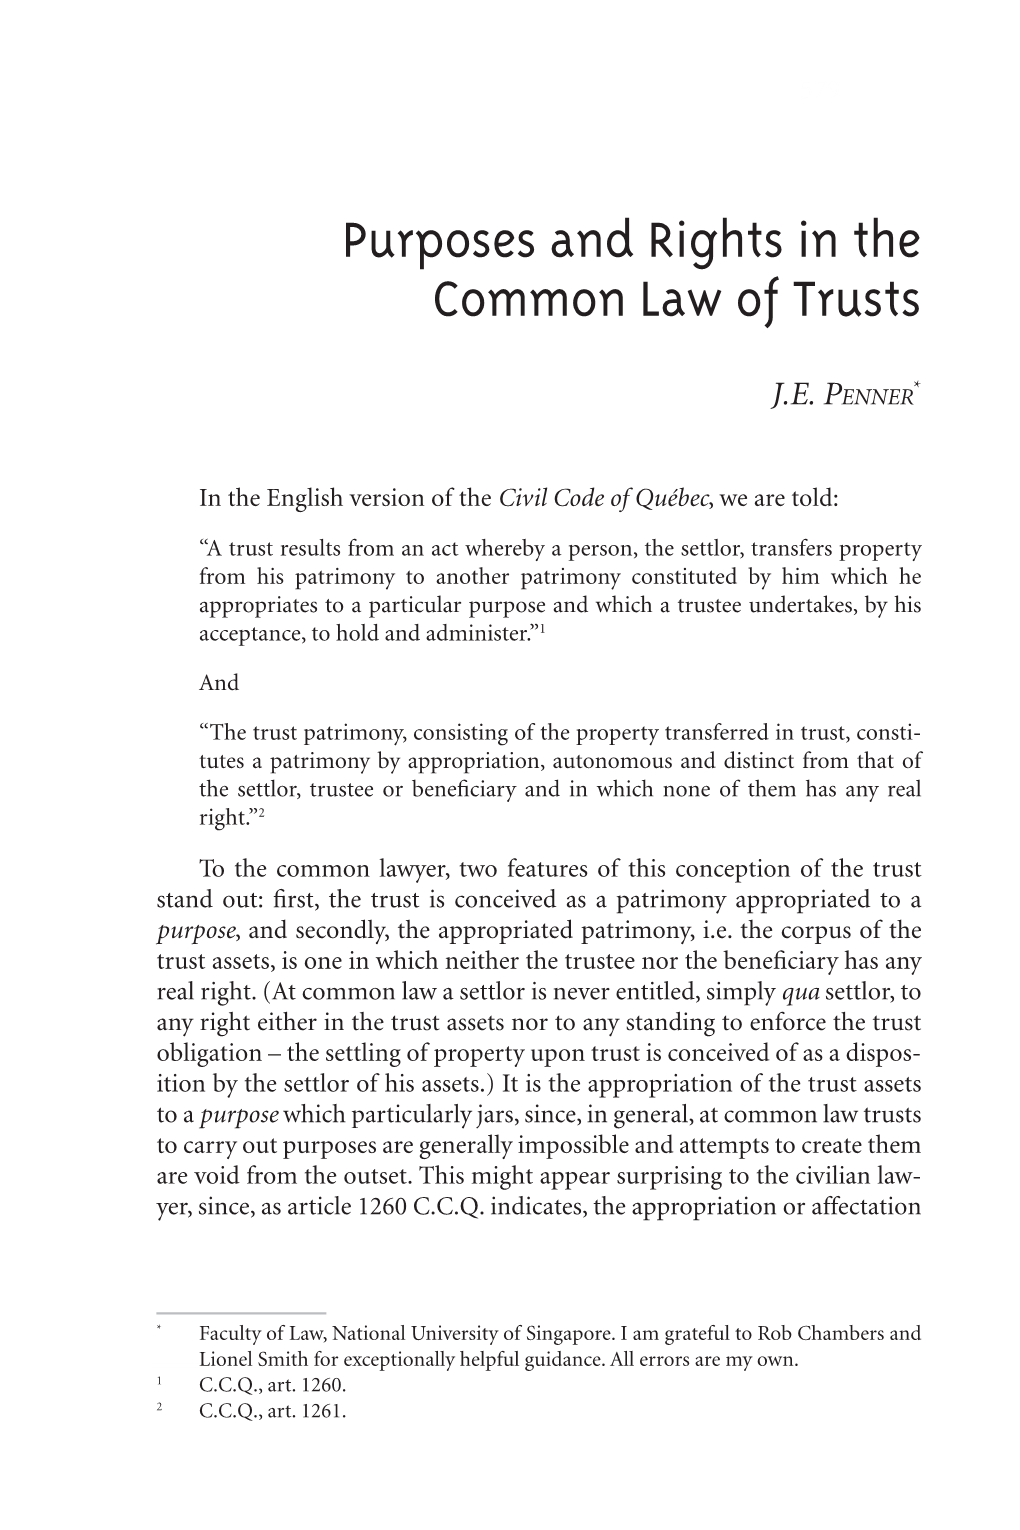 Purposes and Rights in the Common Law of Trusts